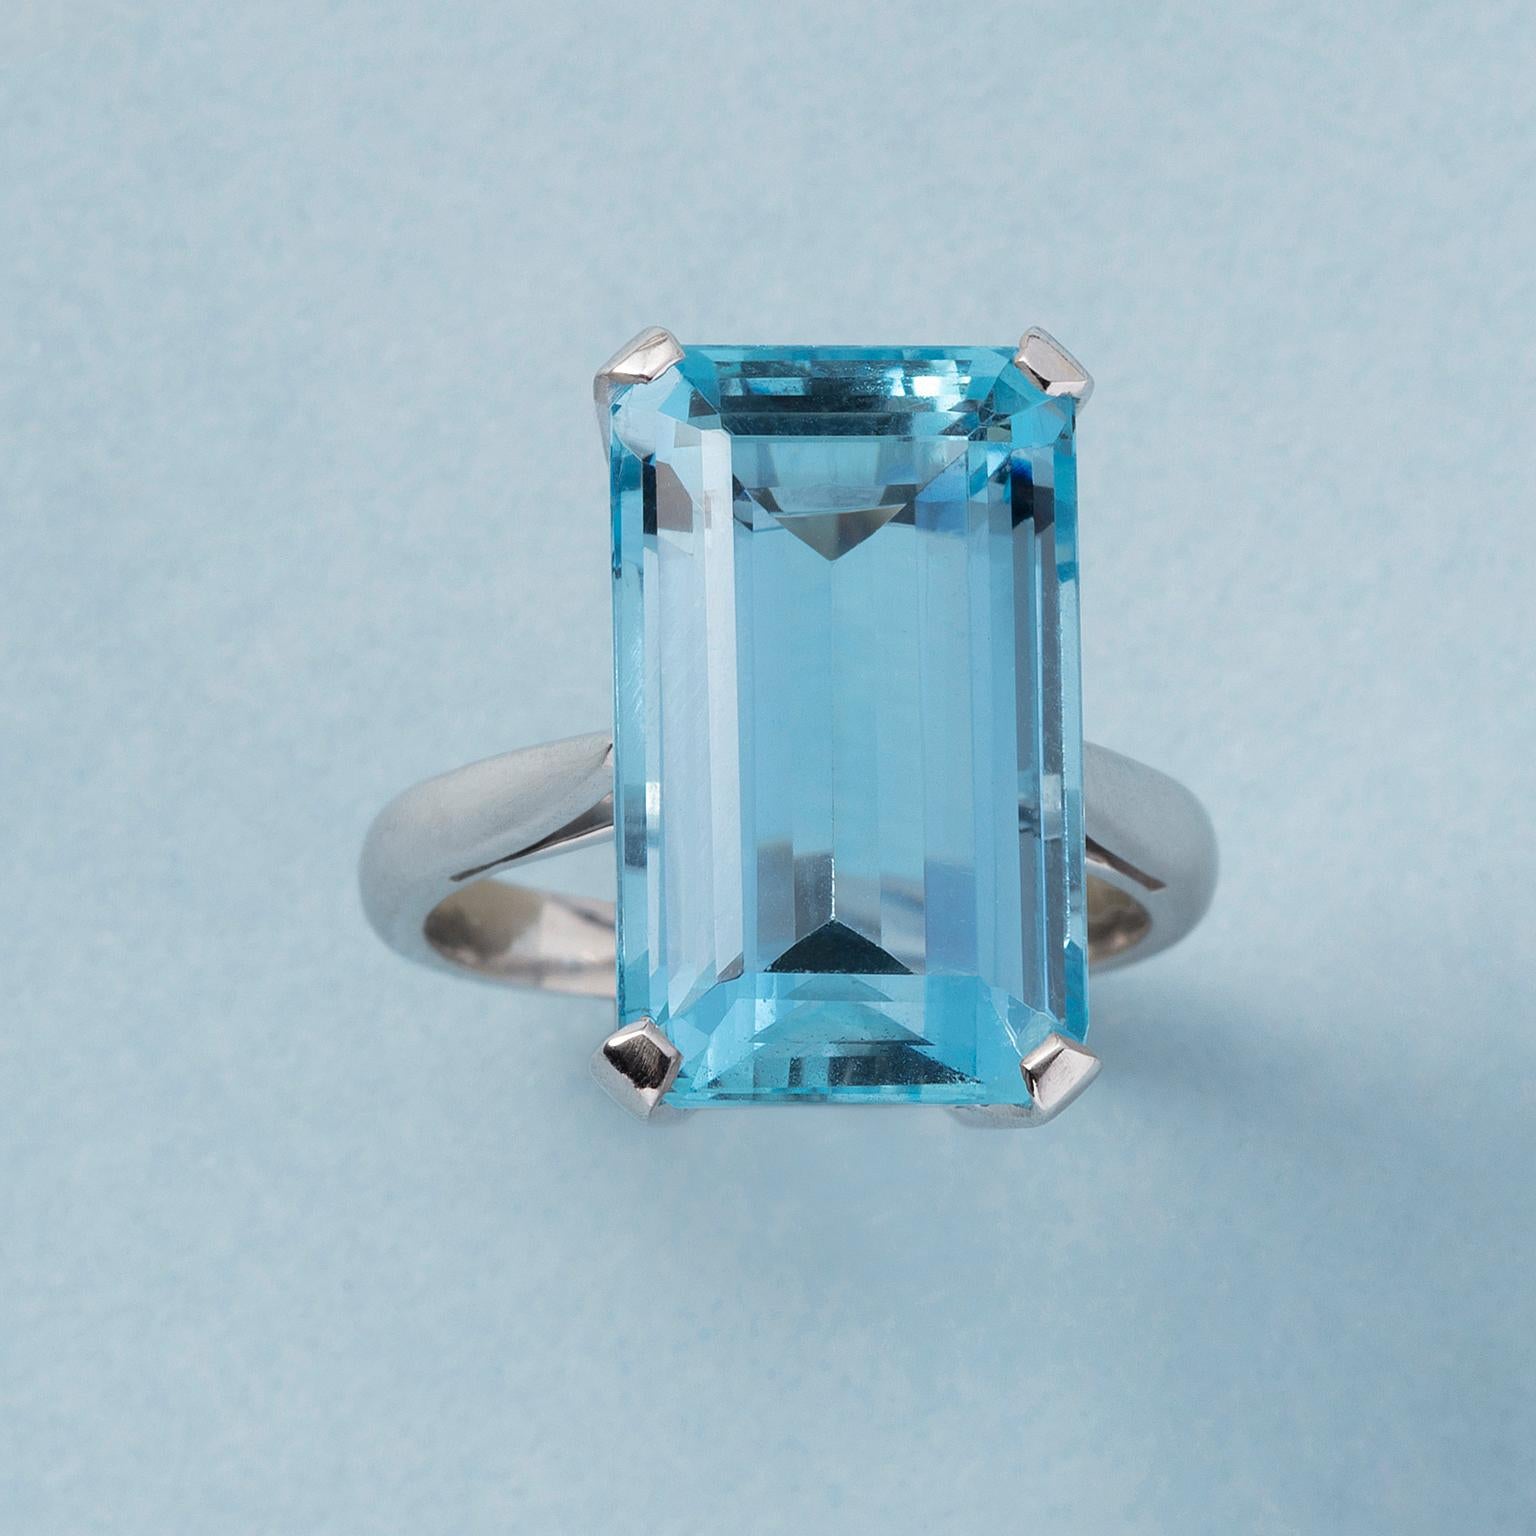 An 18 carat white gold solitaire ring set with a step cut aquamarine in flawless condition and quality (circa 14 carat), France, marked with a French aigle and half a illegible French master mark.

weight: 8.44 grams
size: 18- mm / 7 3/4 US
width: 2